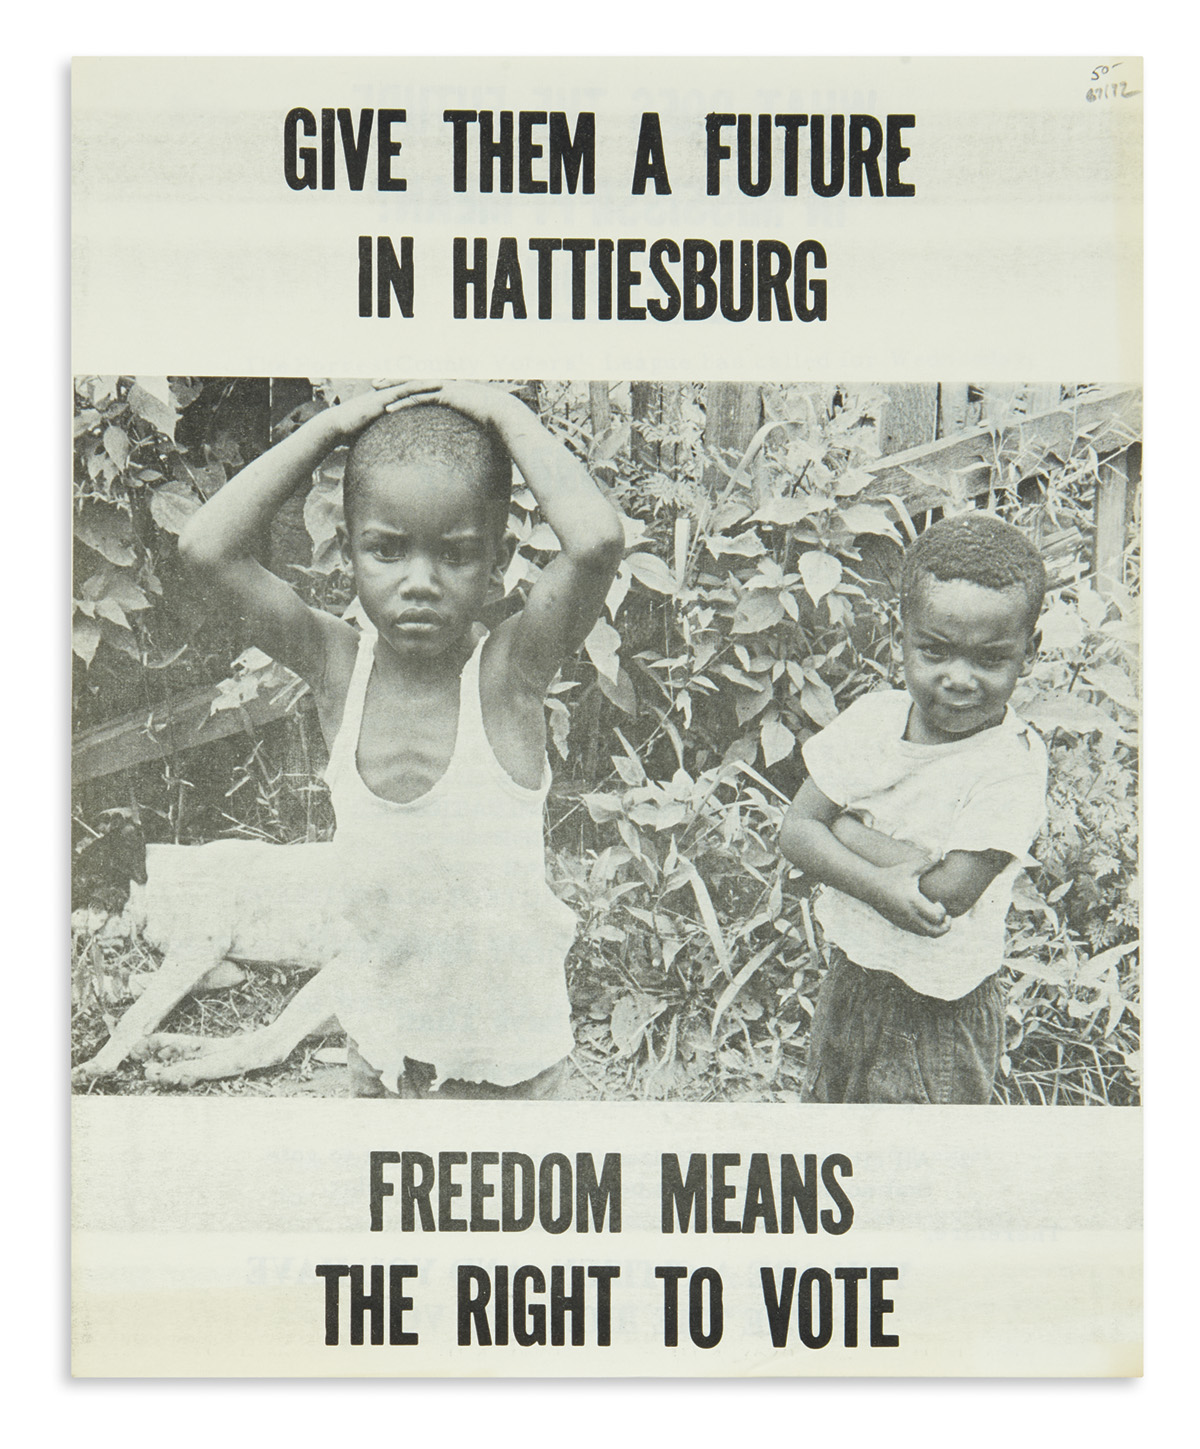 (CIVIL RIGHTS.) Give Them a Future in Hattiesburg: Freedom Means the Right to Vote.